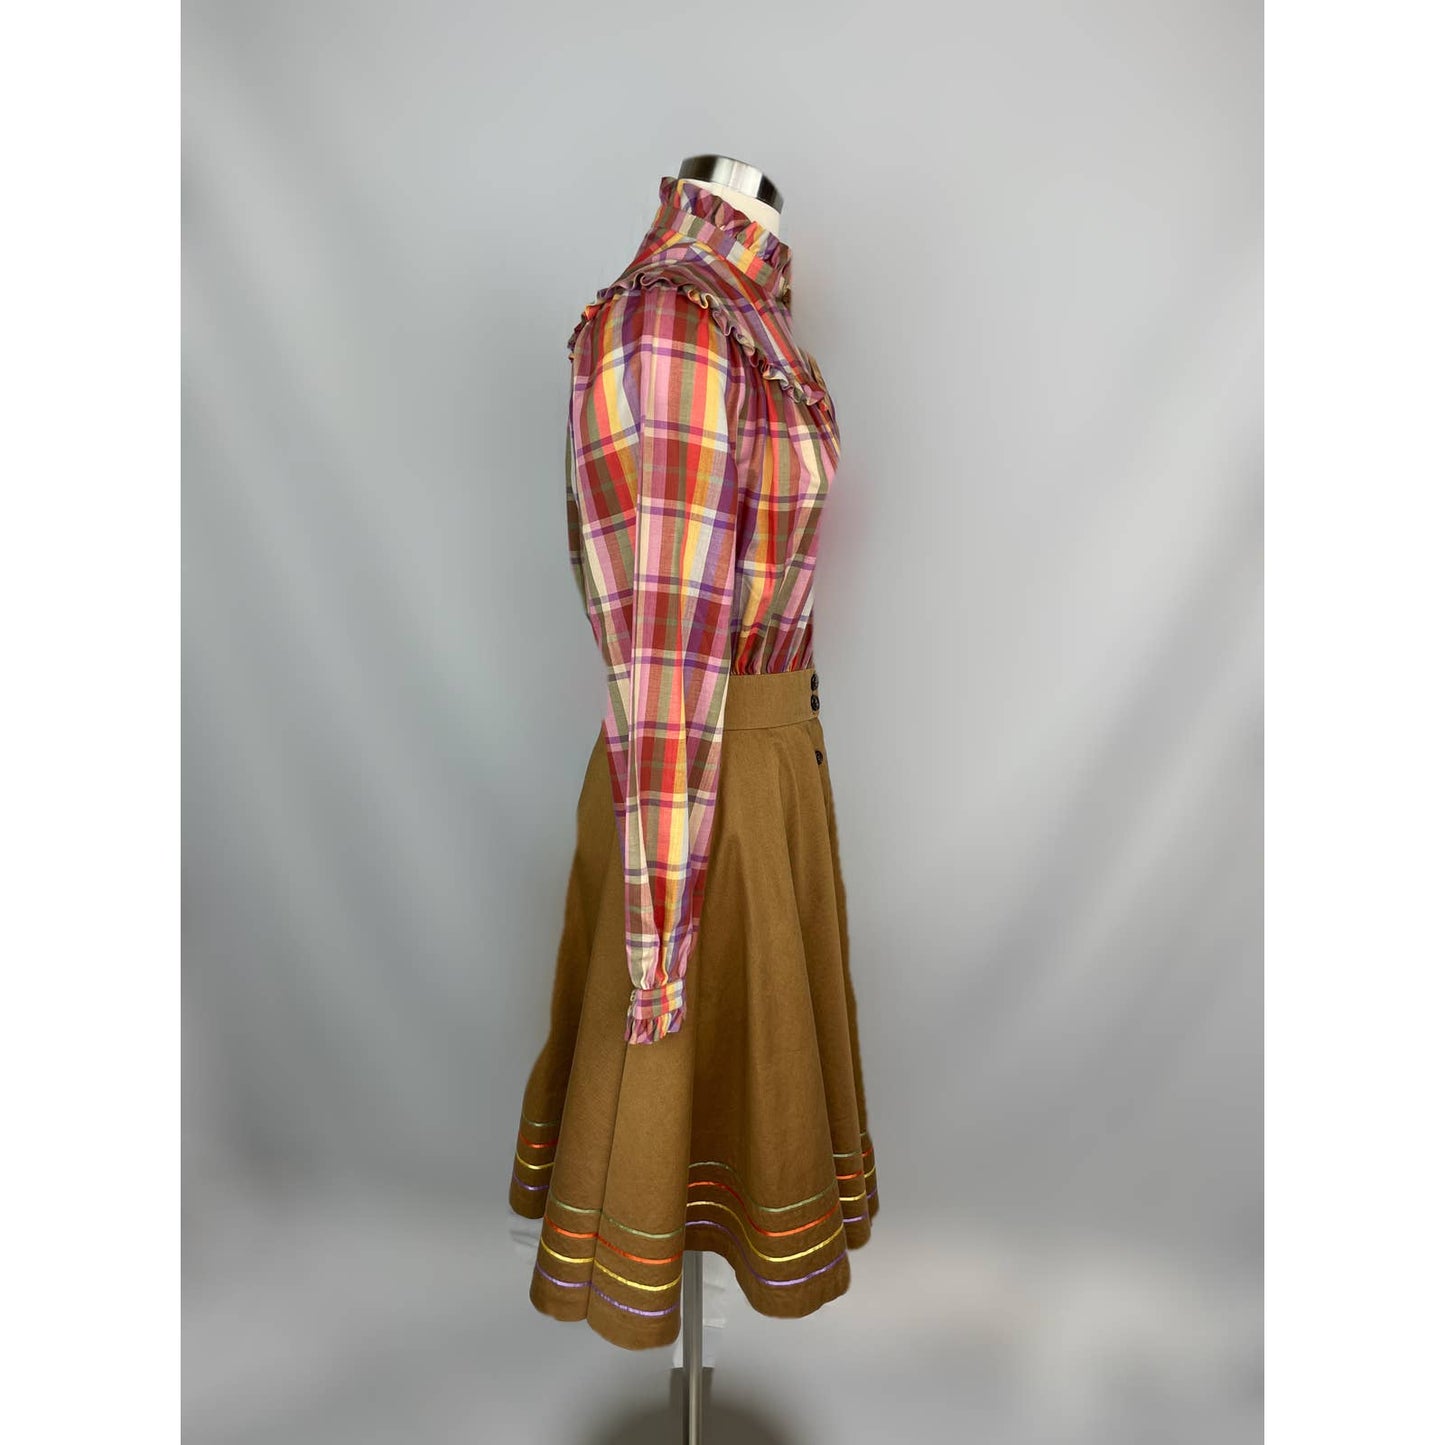 Vintage 1980s Dress Plaid Ruffle Pink Brown Full Skirt Small High Collar A1008